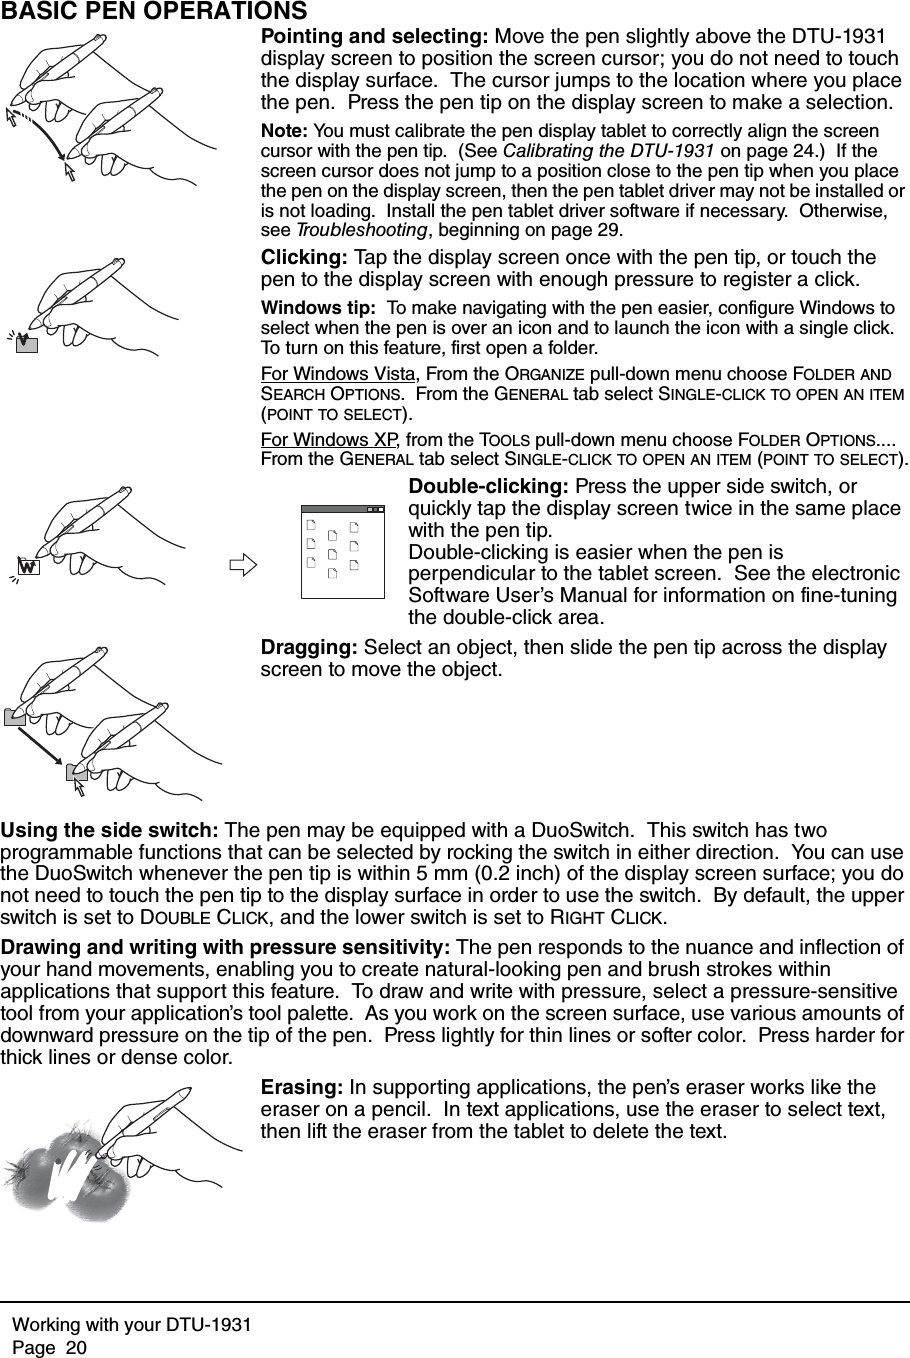 Working with your DTU-1931Page  20BASIC PEN OPERATIONSPointing and selecting: Move the pen slightly above the DTU-1931 display screen to position the screen cursor; you do not need to touch the display surface.  The cursor jumps to the location where you place the pen.  Press the pen tip on the display screen to make a selection.Note: You must calibrate the pen display tablet to correctly align the screen cursor with the pen tip.  (See Calibrating the DTU-1931 on page 24.)  If the screen cursor does not jump to a position close to the pen tip when you place the pen on the display screen, then the pen tablet driver may not be installed or is not loading.  Install the pen tablet driver software if necessary.  Otherwise, see Troubleshooting, beginning on page 29.Clicking: Tap the display screen once with the pen tip, or touch the pen to the display screen with enough pressure to register a click.Windows tip:  To make navigating with the pen easier, configure Windows to select when the pen is over an icon and to launch the icon with a single click.  To turn on this feature, first open a folder.For Windows Vista, From the ORGANIZE pull-down menu choose FOLDER AND SEARCH OPTIONS.  From the GENERAL tab select SINGLE-CLICK TO OPEN AN ITEM (POINT TO SELECT).For Windows XP, from the TOOLS pull-down menu choose FOLDER OPTIONS....  From the GENERAL tab select SINGLE-CLICK TO OPEN AN ITEM (POINT TO SELECT).Double-clicking: Press the upper side switch, or quickly tap the display screen twice in the same place with the pen tip.  Double-clicking is easier when the pen is perpendicular to the tablet screen.  See the electronic Software User’s Manual for information on fine-tuning the double-click area.Dragging: Select an object, then slide the pen tip across the display screen to move the object.Using the side switch: The pen may be equipped with a DuoSwitch.  This switch has two programmable functions that can be selected by rocking the switch in either direction.  You can use the DuoSwitch whenever the pen tip is within 5 mm (0.2 inch) of the display screen surface; you do not need to touch the pen tip to the display surface in order to use the switch.  By default, the upper switch is set to DOUBLE CLICK, and the lower switch is set to RIGHT CLICK.Drawing and writing with pressure sensitivity: The pen responds to the nuance and inflection of your hand movements, enabling you to create natural-looking pen and brush strokes within applications that support this feature.  To draw and write with pressure, select a pressure-sensitive tool from your application’s tool palette.  As you work on the screen surface, use various amounts of downward pressure on the tip of the pen.  Press lightly for thin lines or softer color.  Press harder for thick lines or dense color.Erasing: In supporting applications, the pen’s eraser works like the eraser on a pencil.  In text applications, use the eraser to select text, then lift the eraser from the tablet to delete the text.